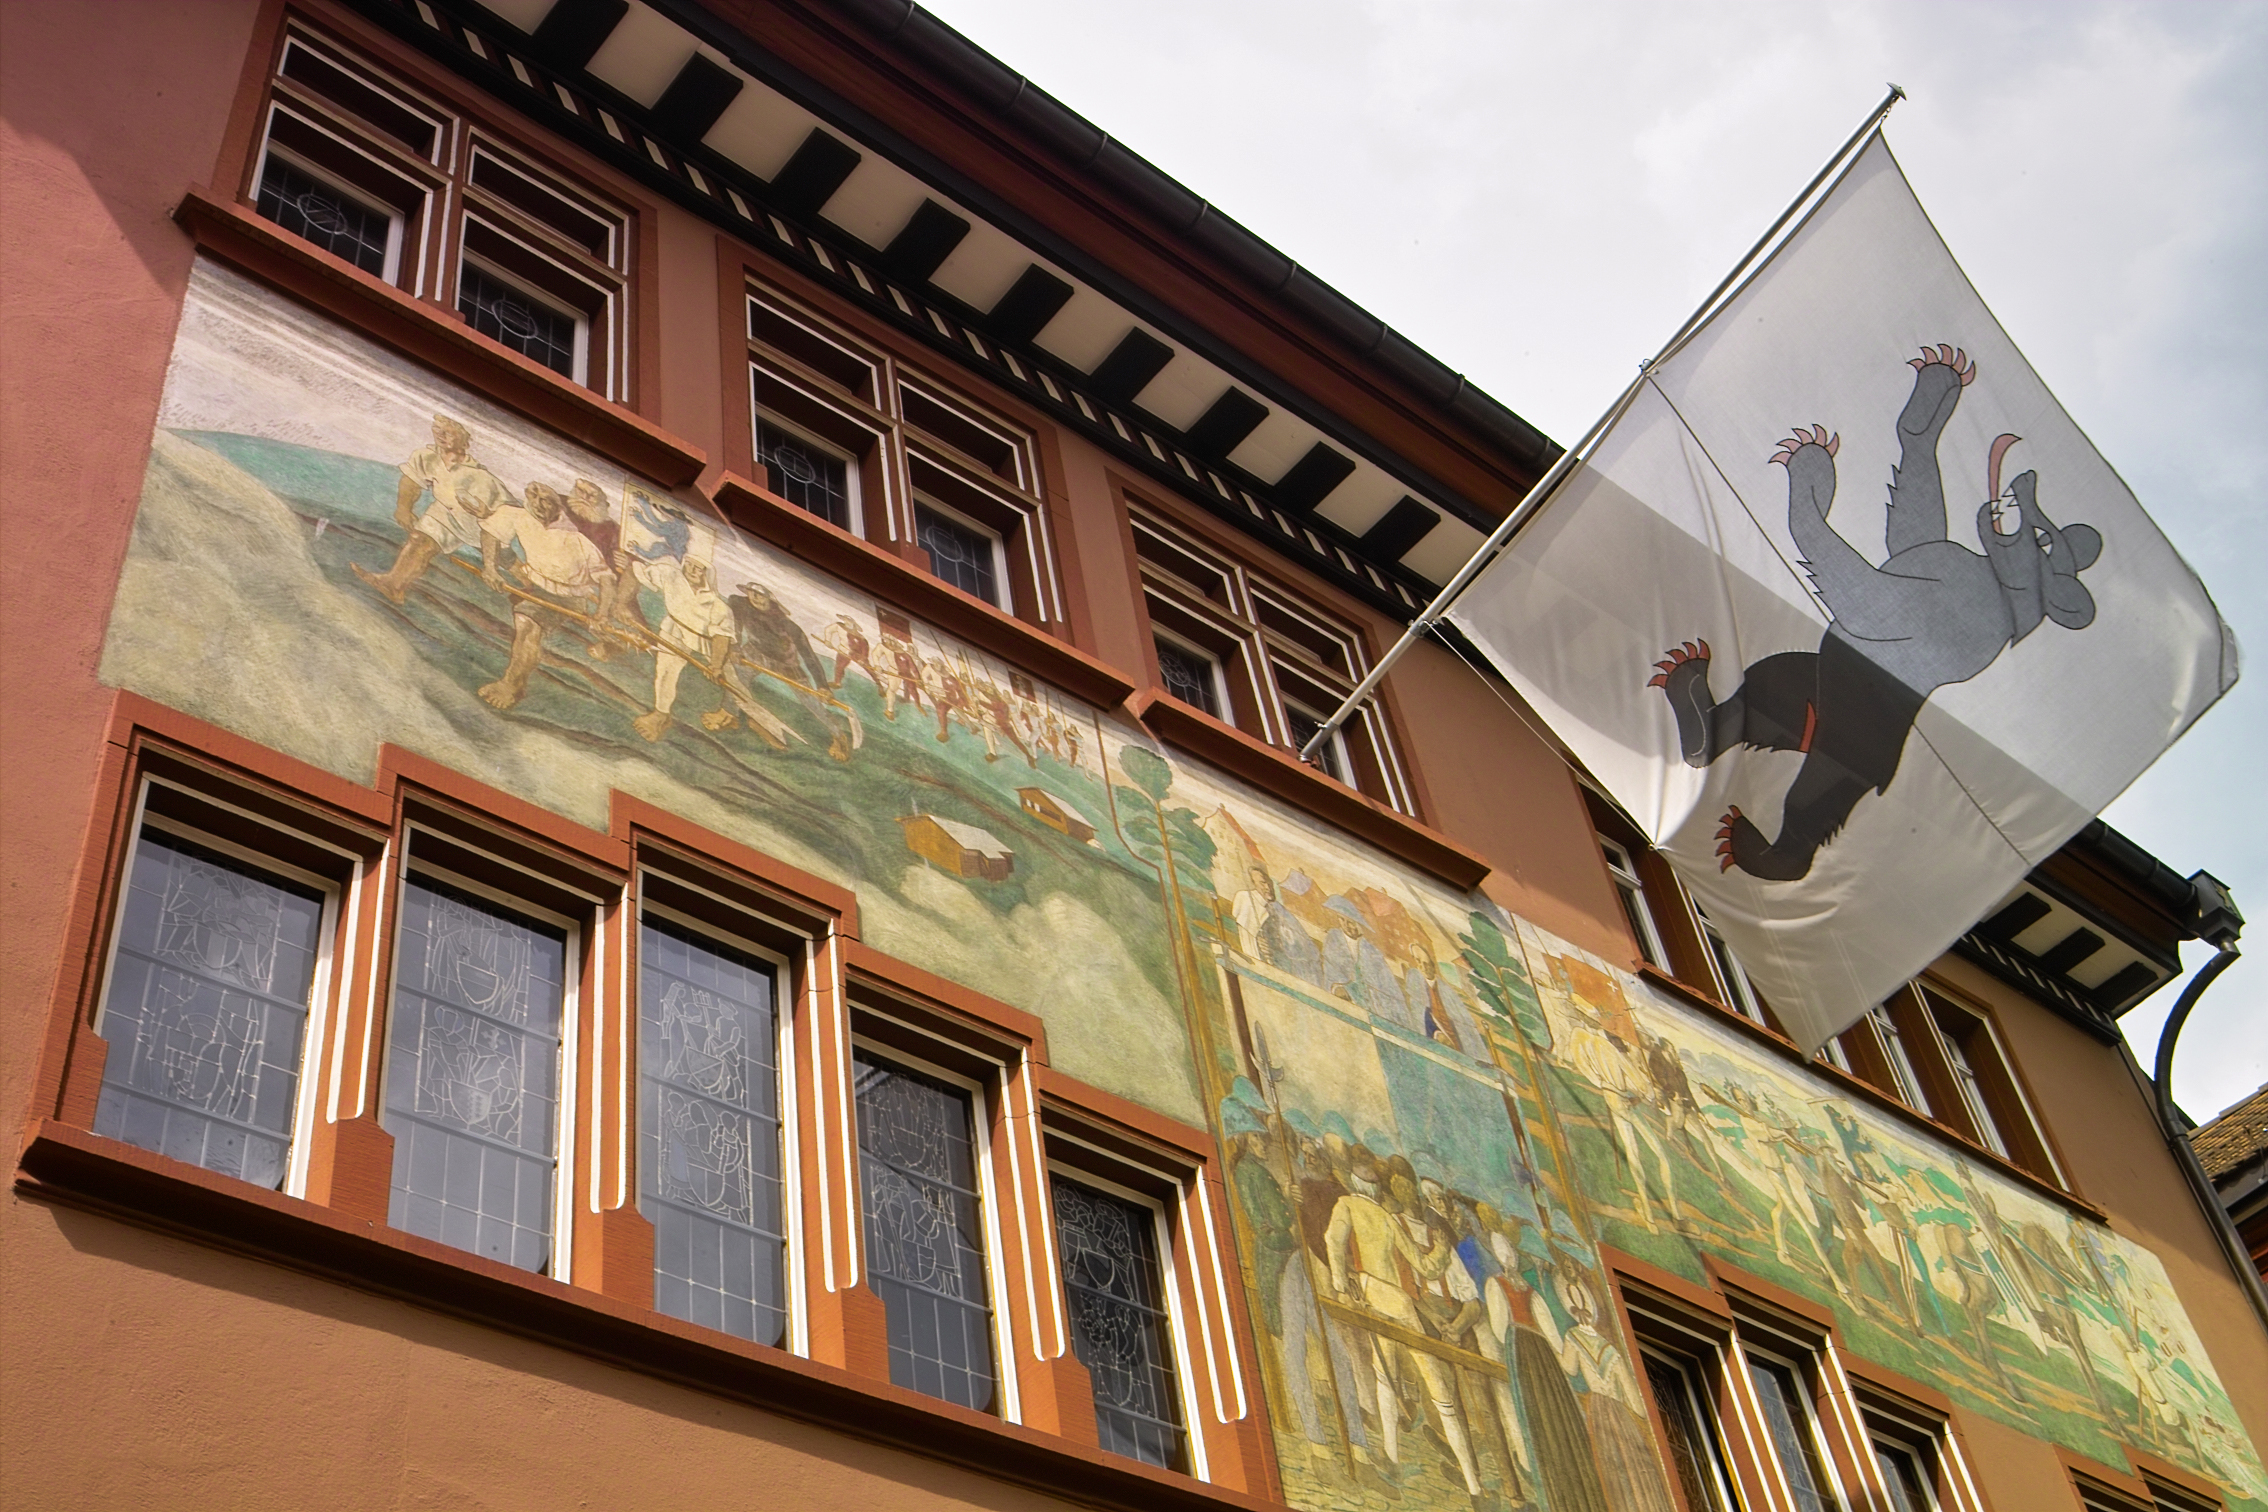 Civic Building in Appenzell